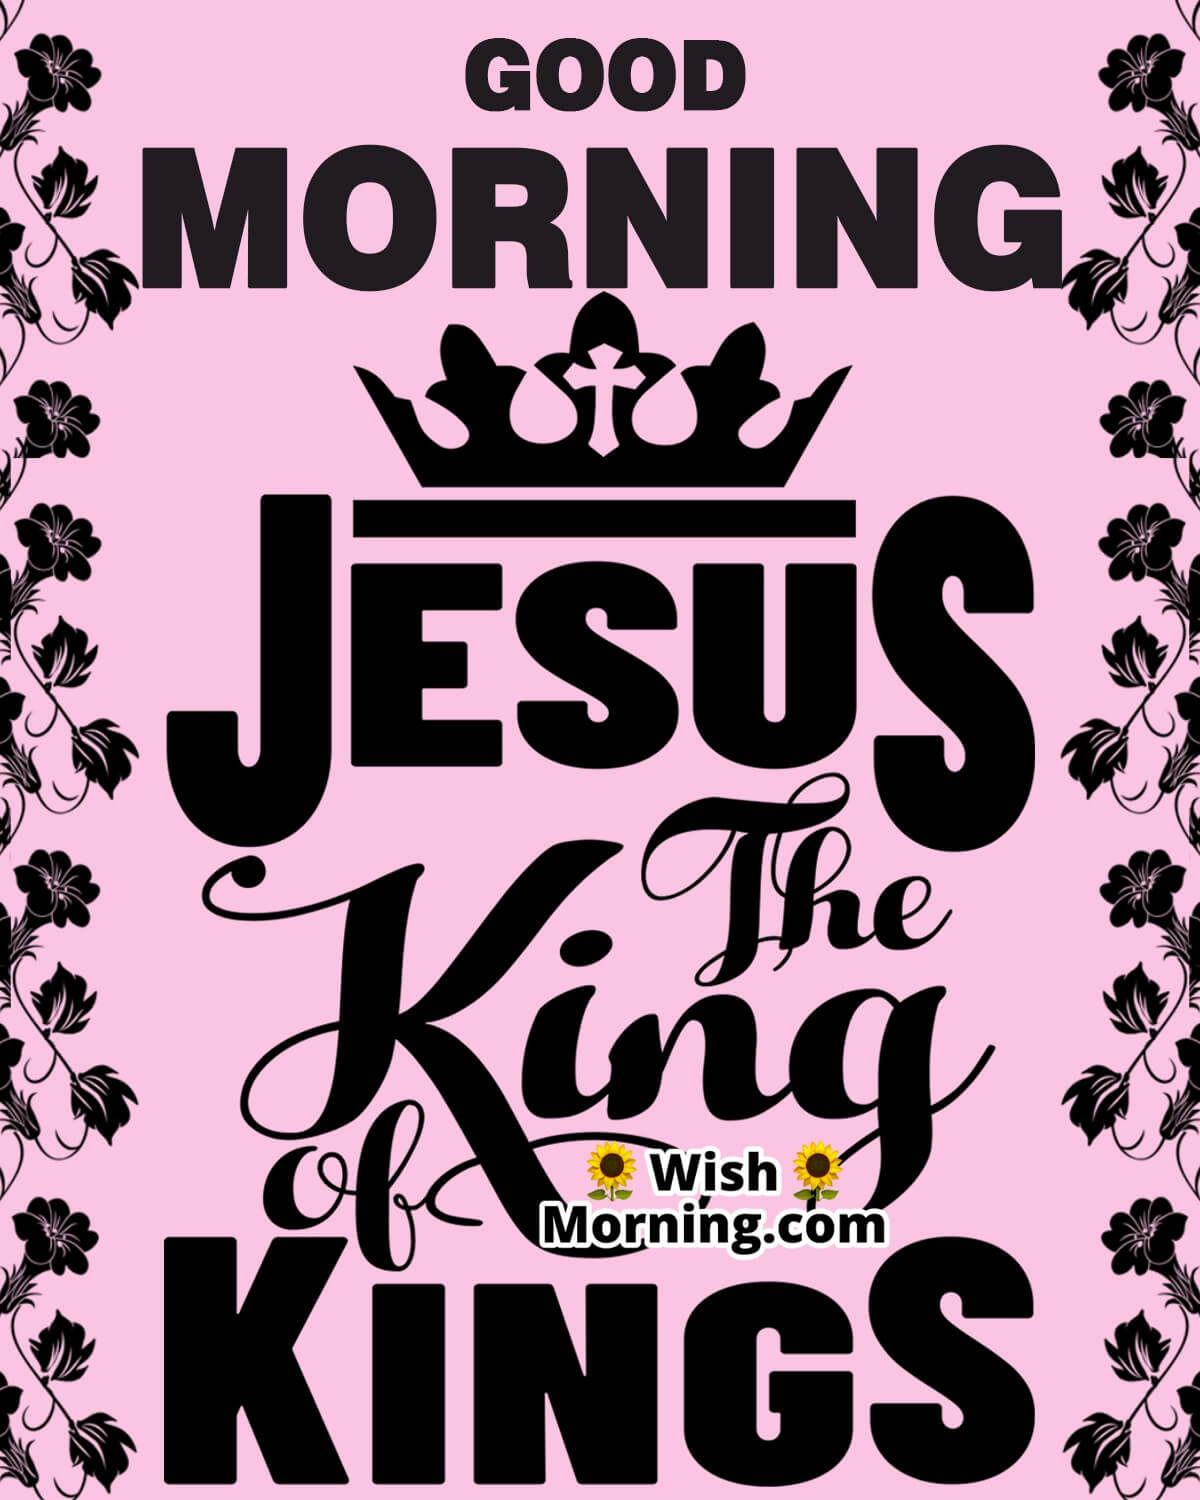 Incredible Compilation of 999+ Jesus Morning Images in Stunning 4K Quality